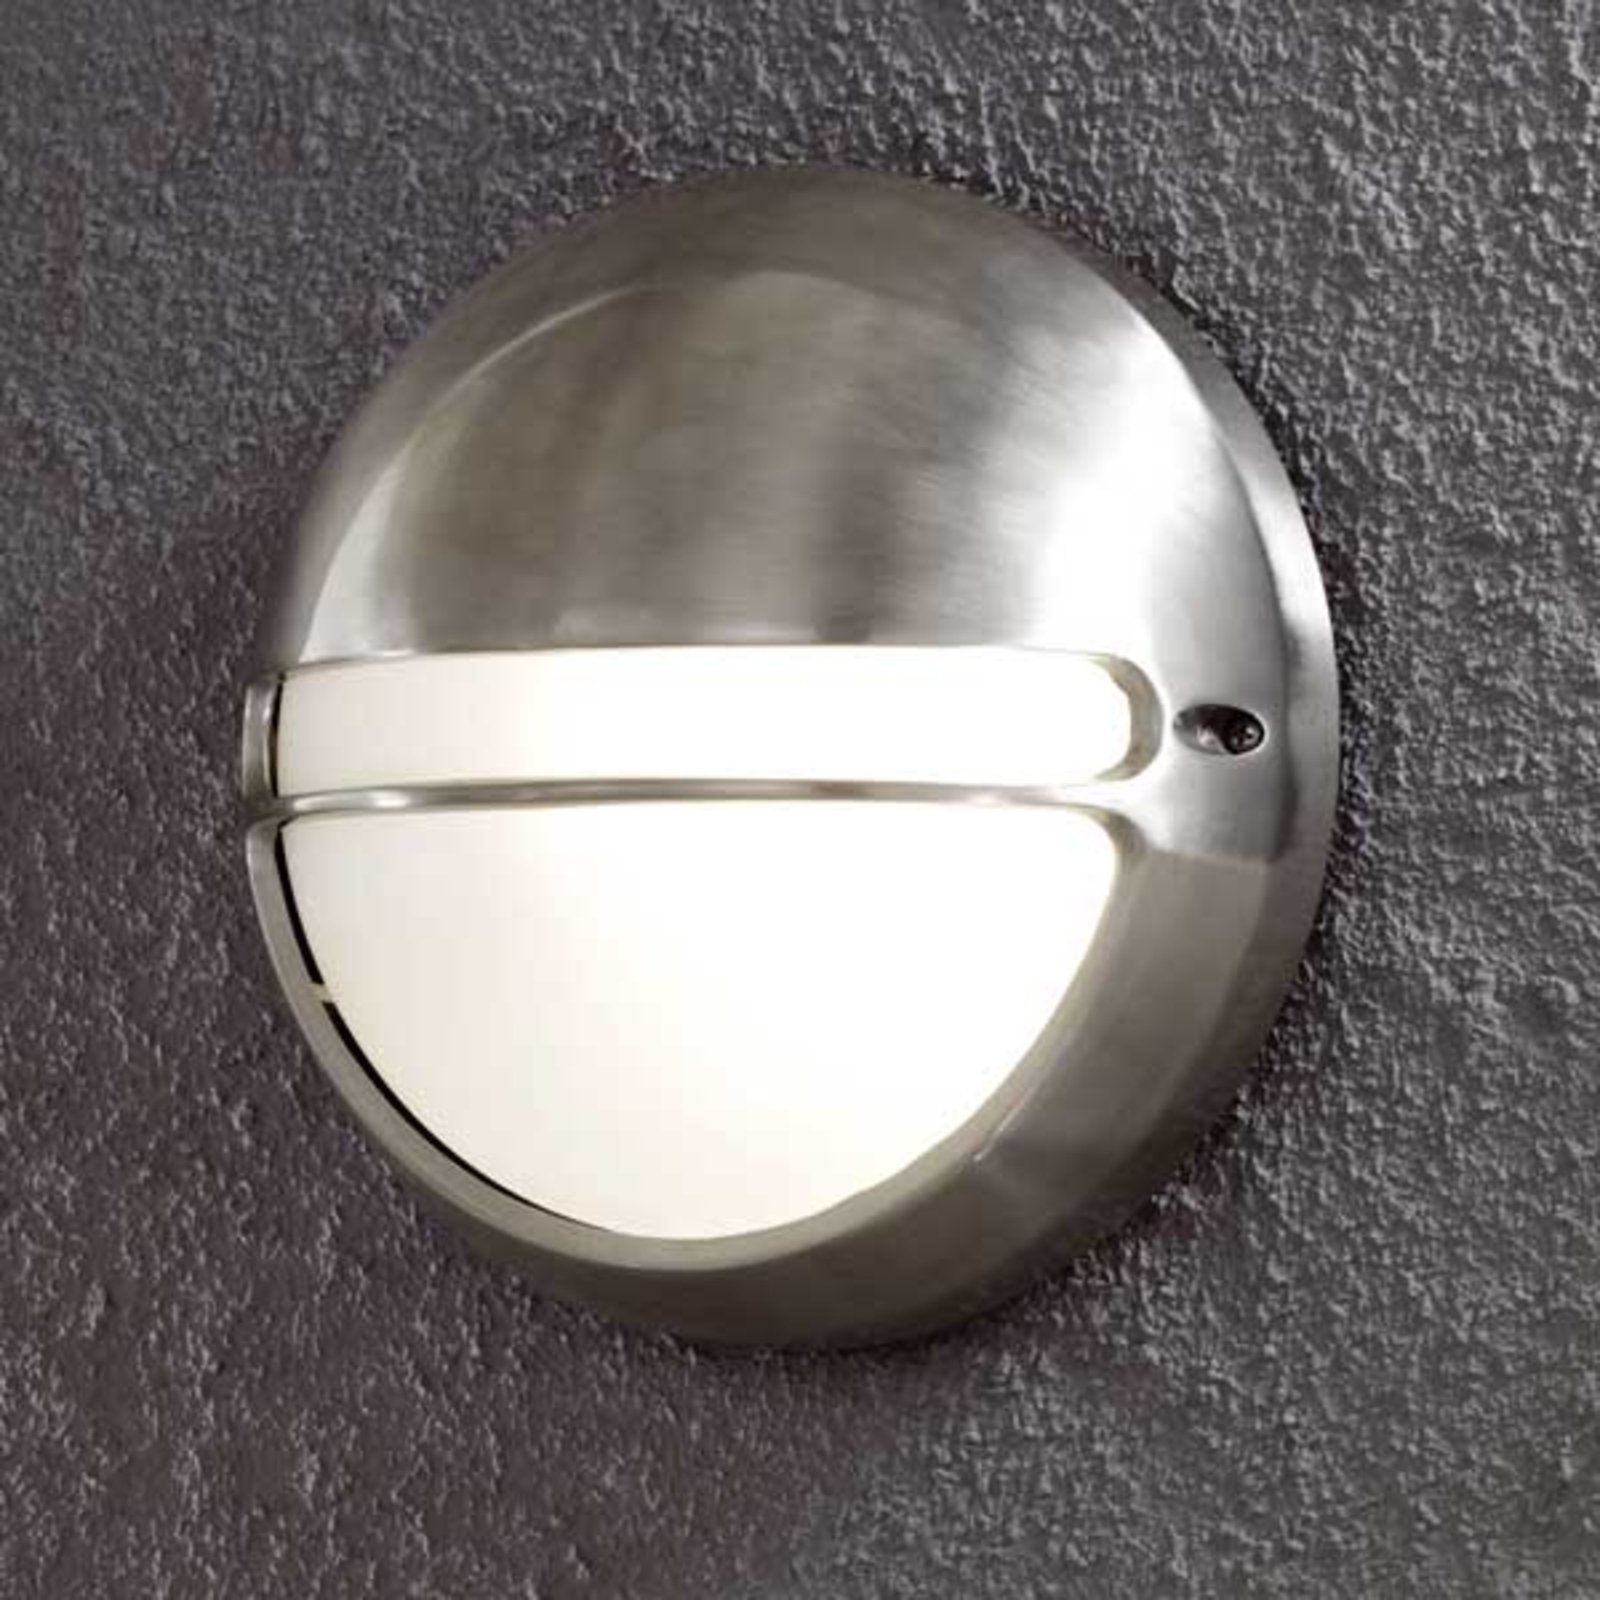 Torino outdoor wall light in a round shape